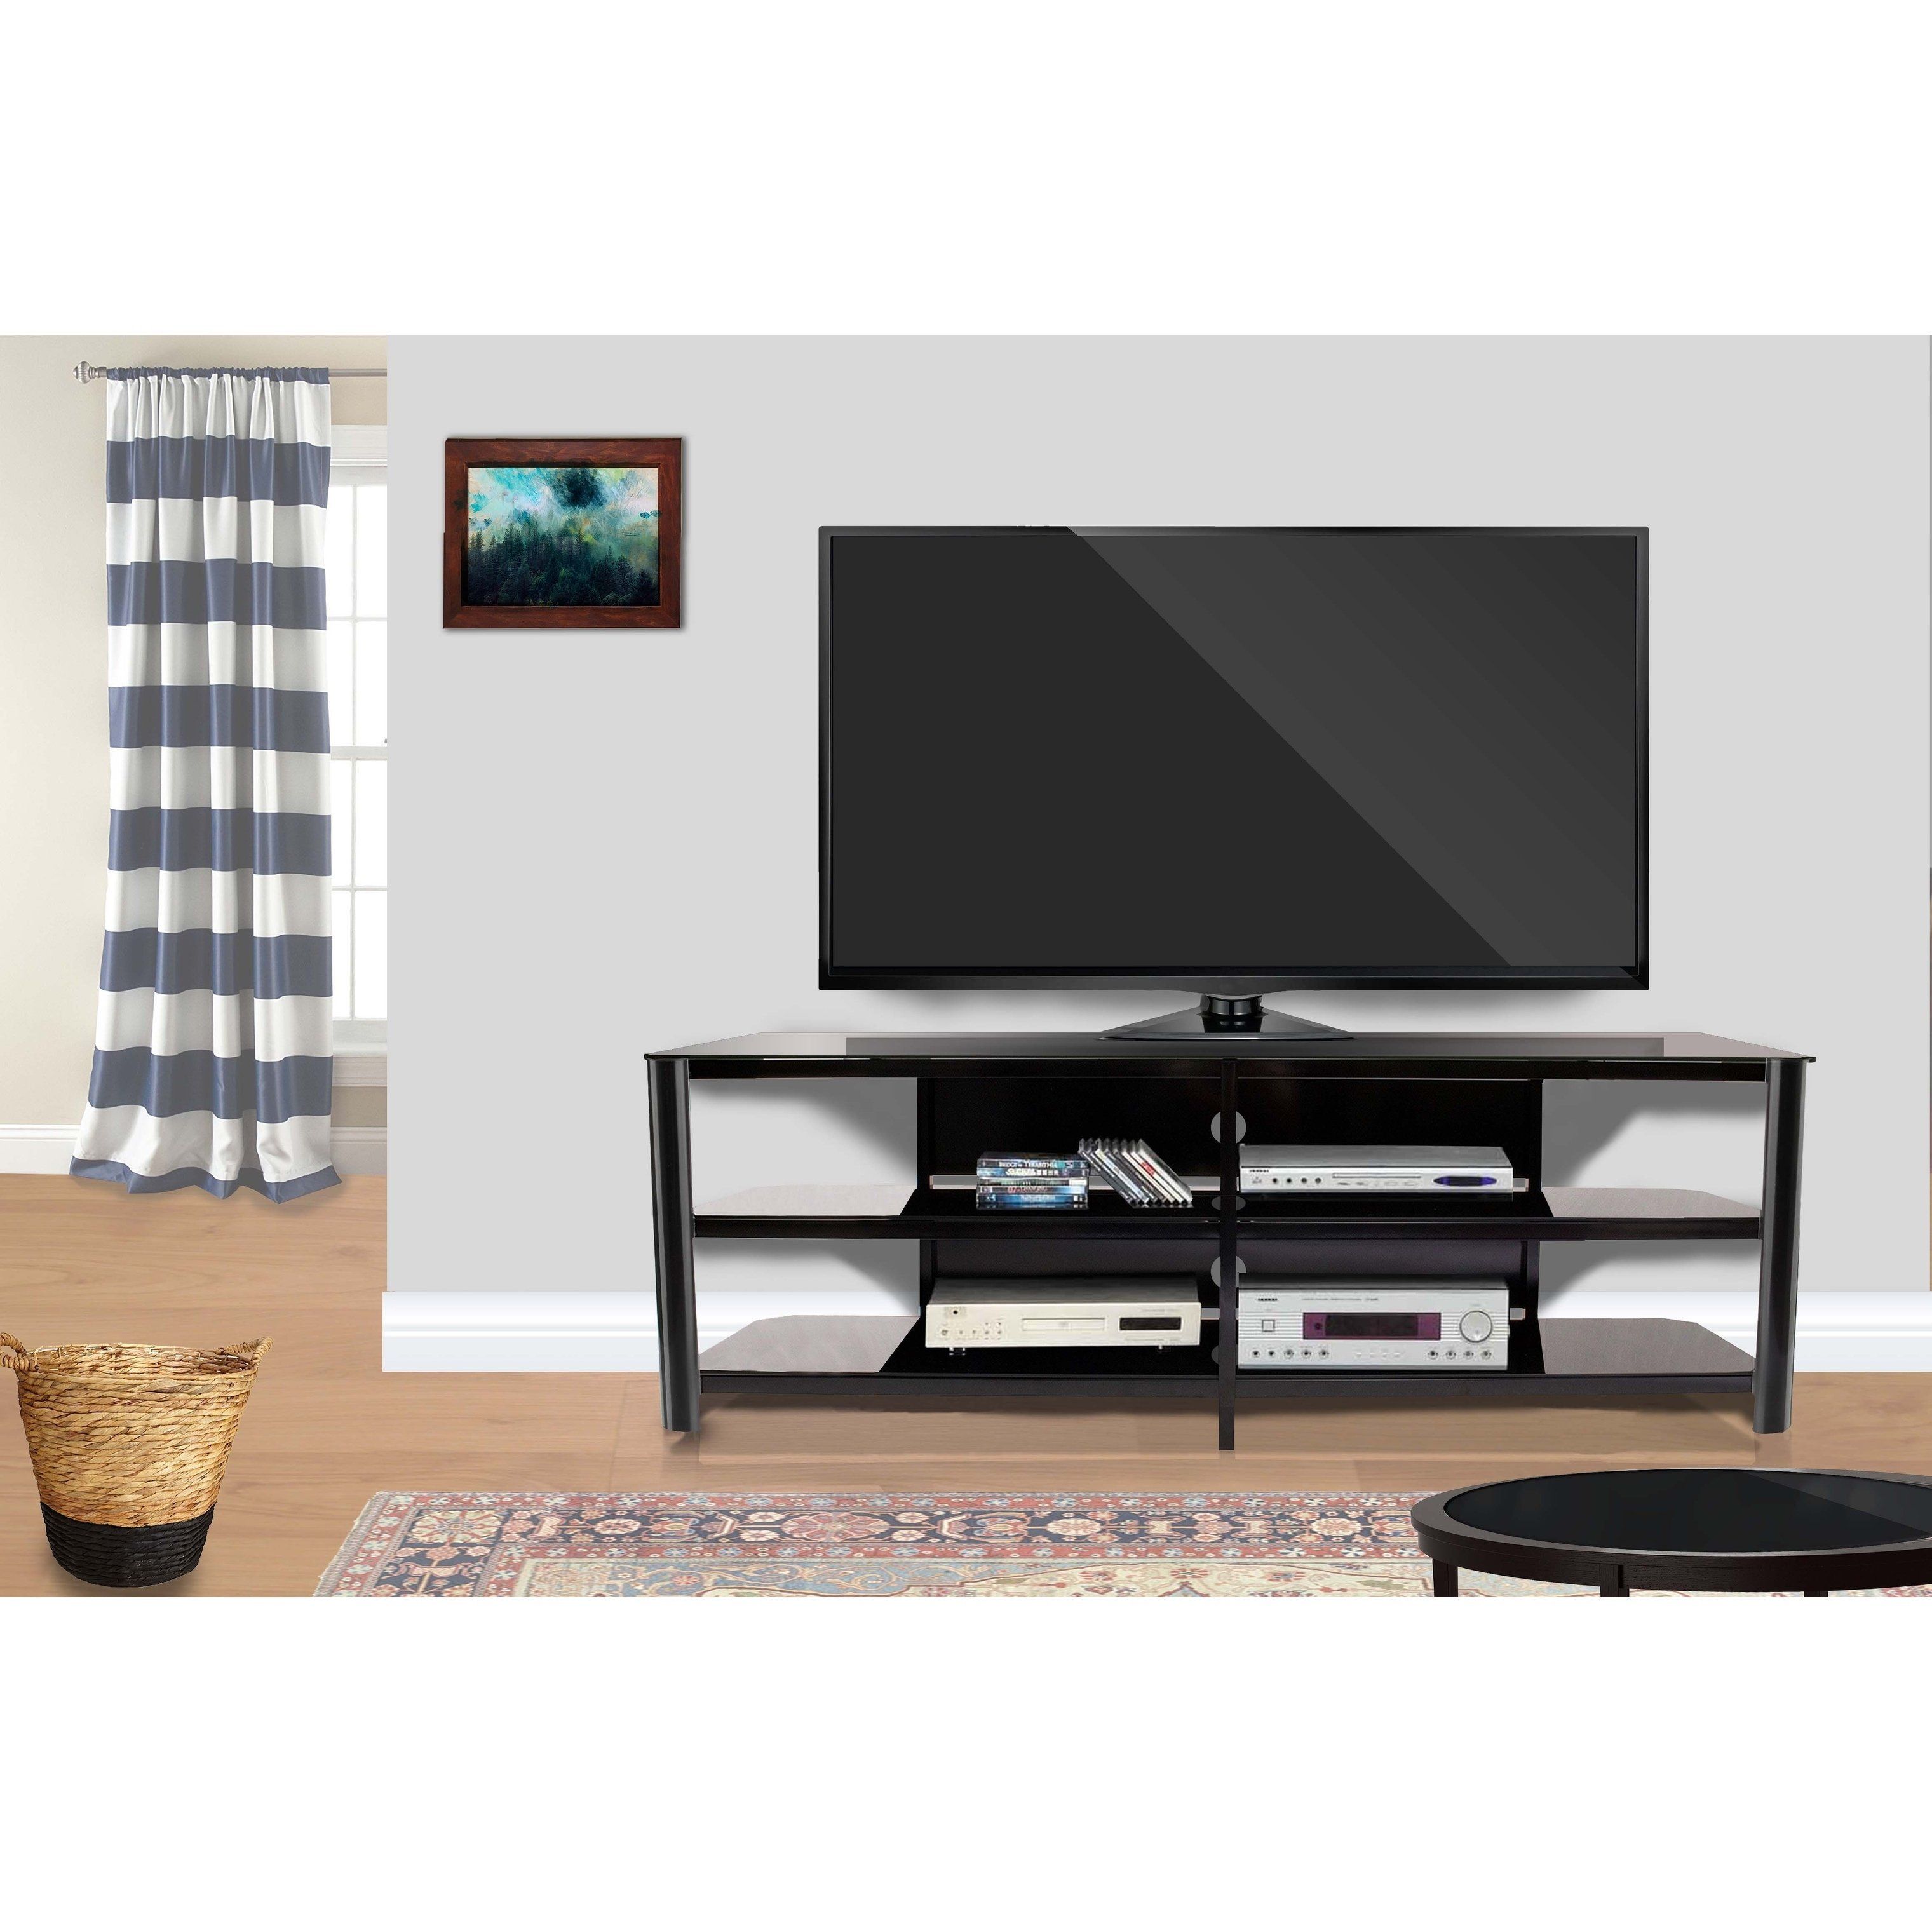 Shop Fold 'n' Snap Oxford Ez Black Innovex Tv Stand – Free Shipping Regarding Oxford 84 Inch Tv Stands (View 10 of 30)